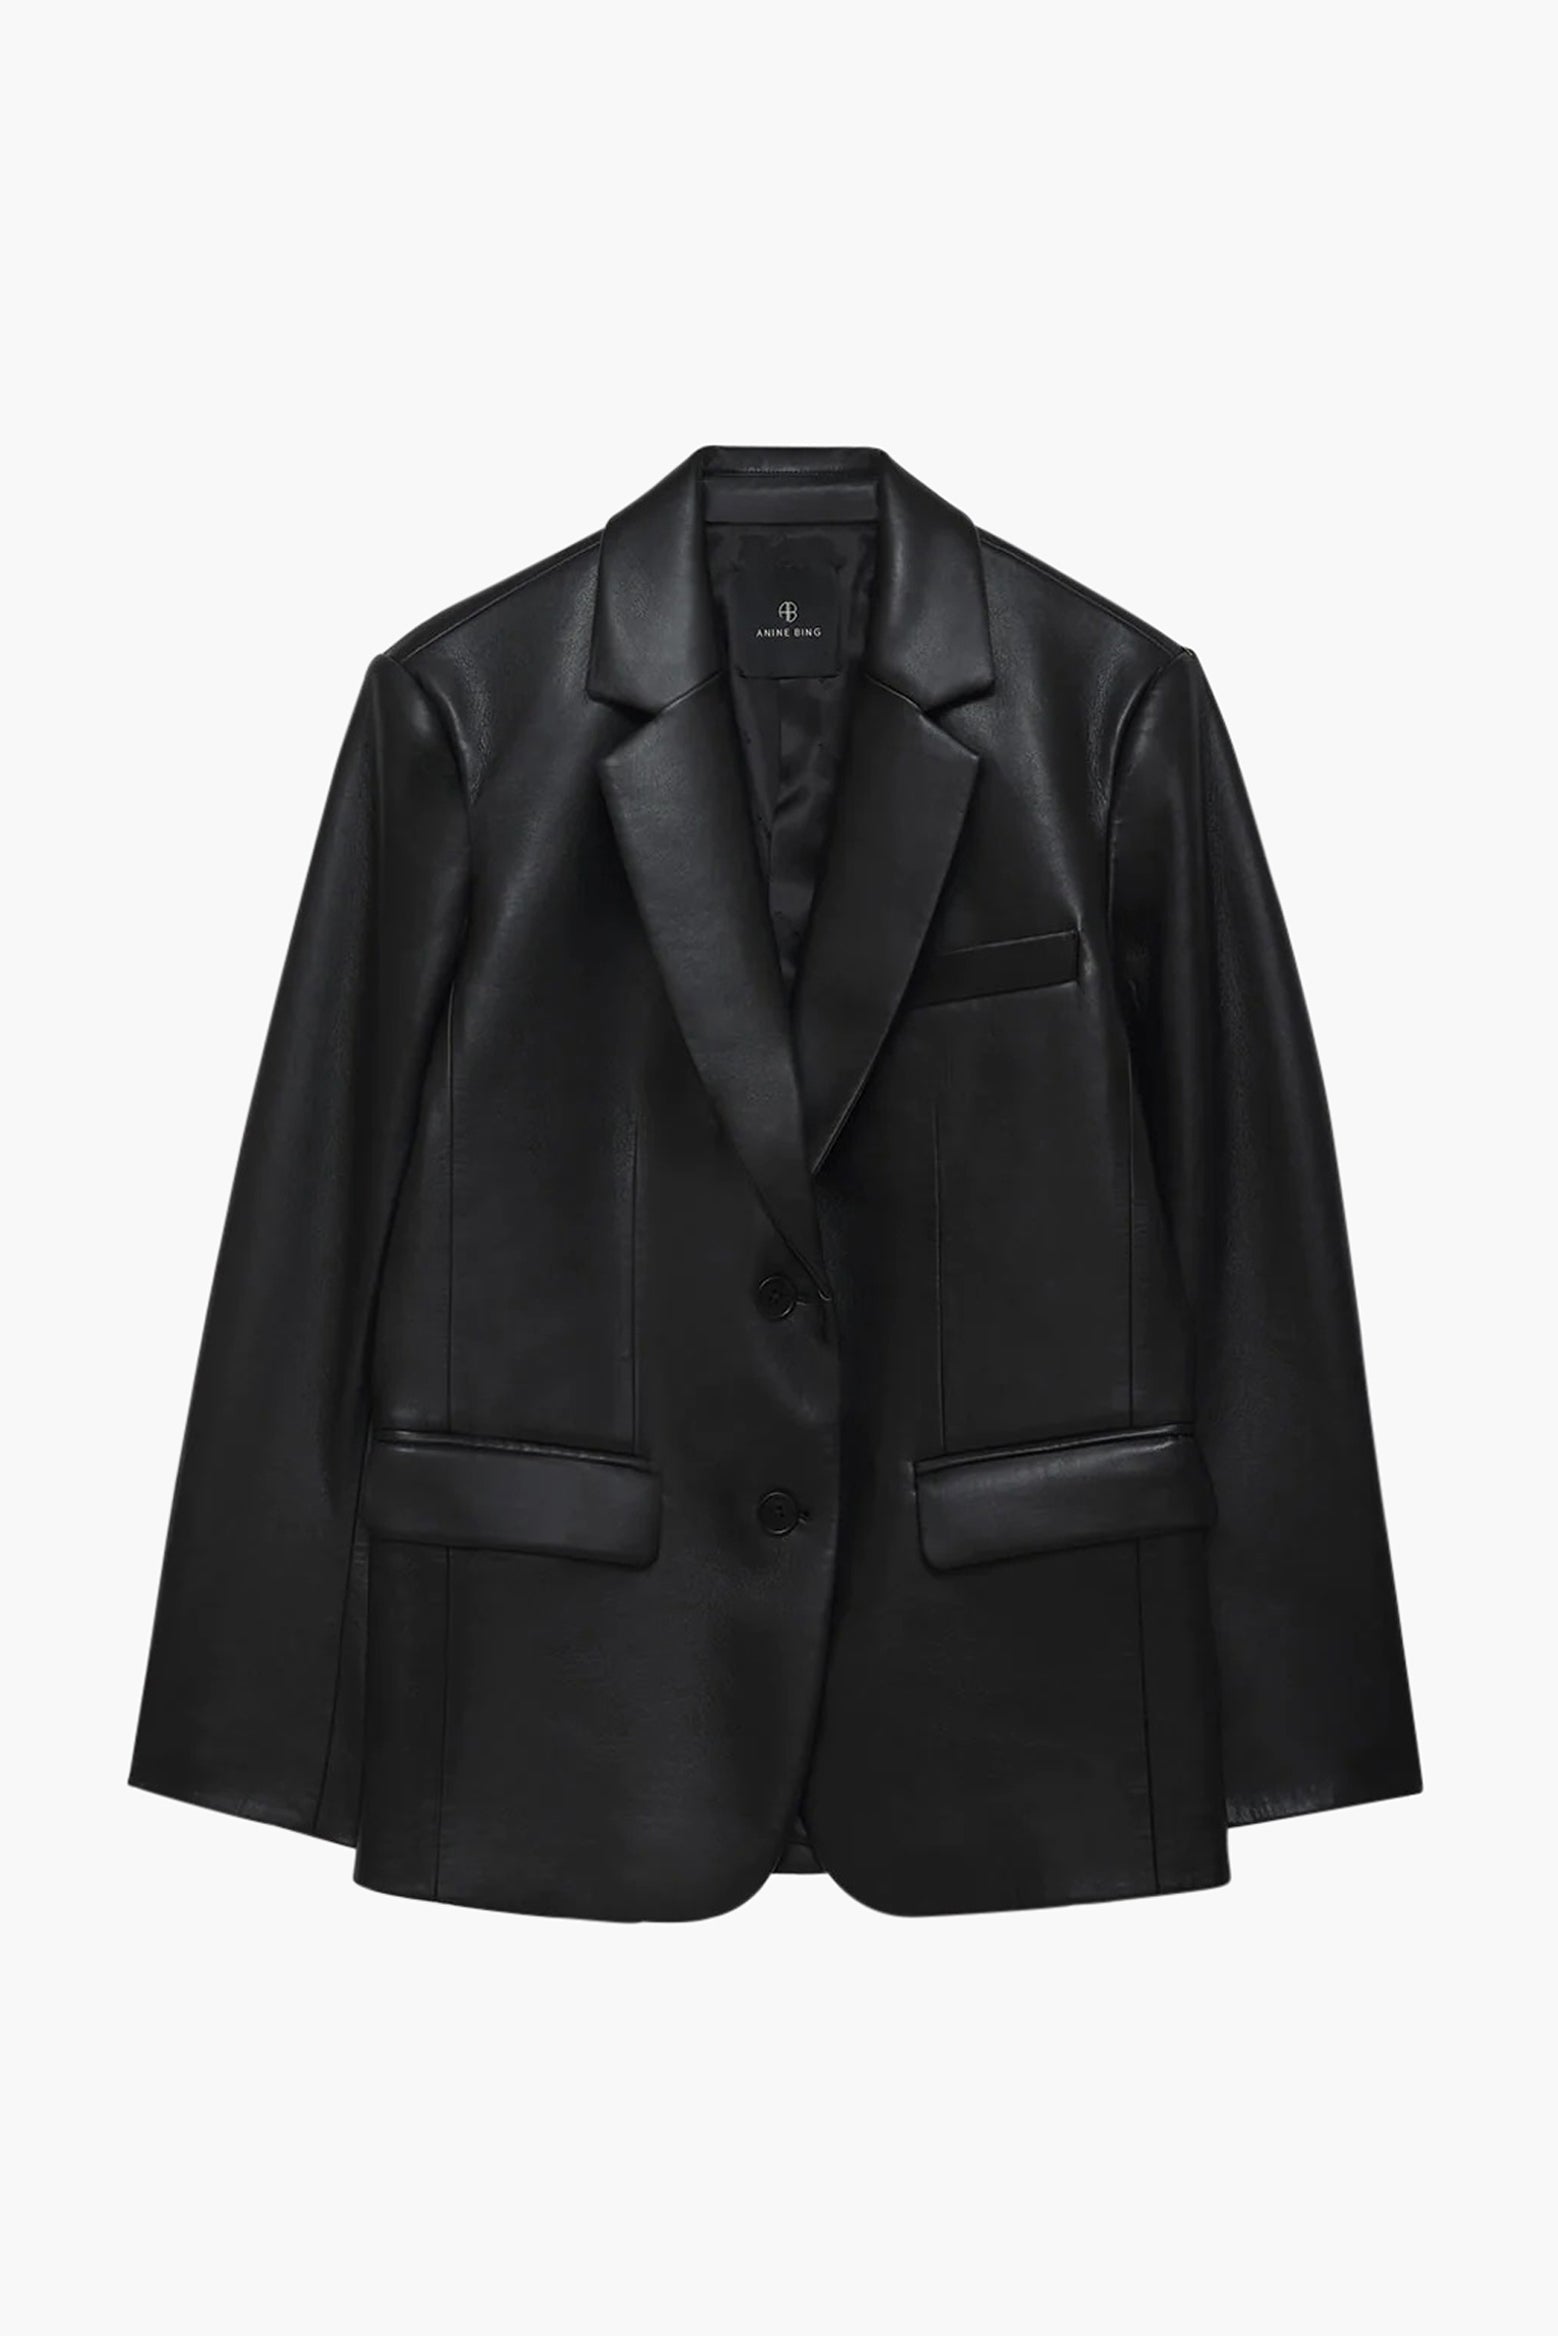 ANINE BING Classic Blazer Black Recycled Leather available at TNT The New Trend Australia.